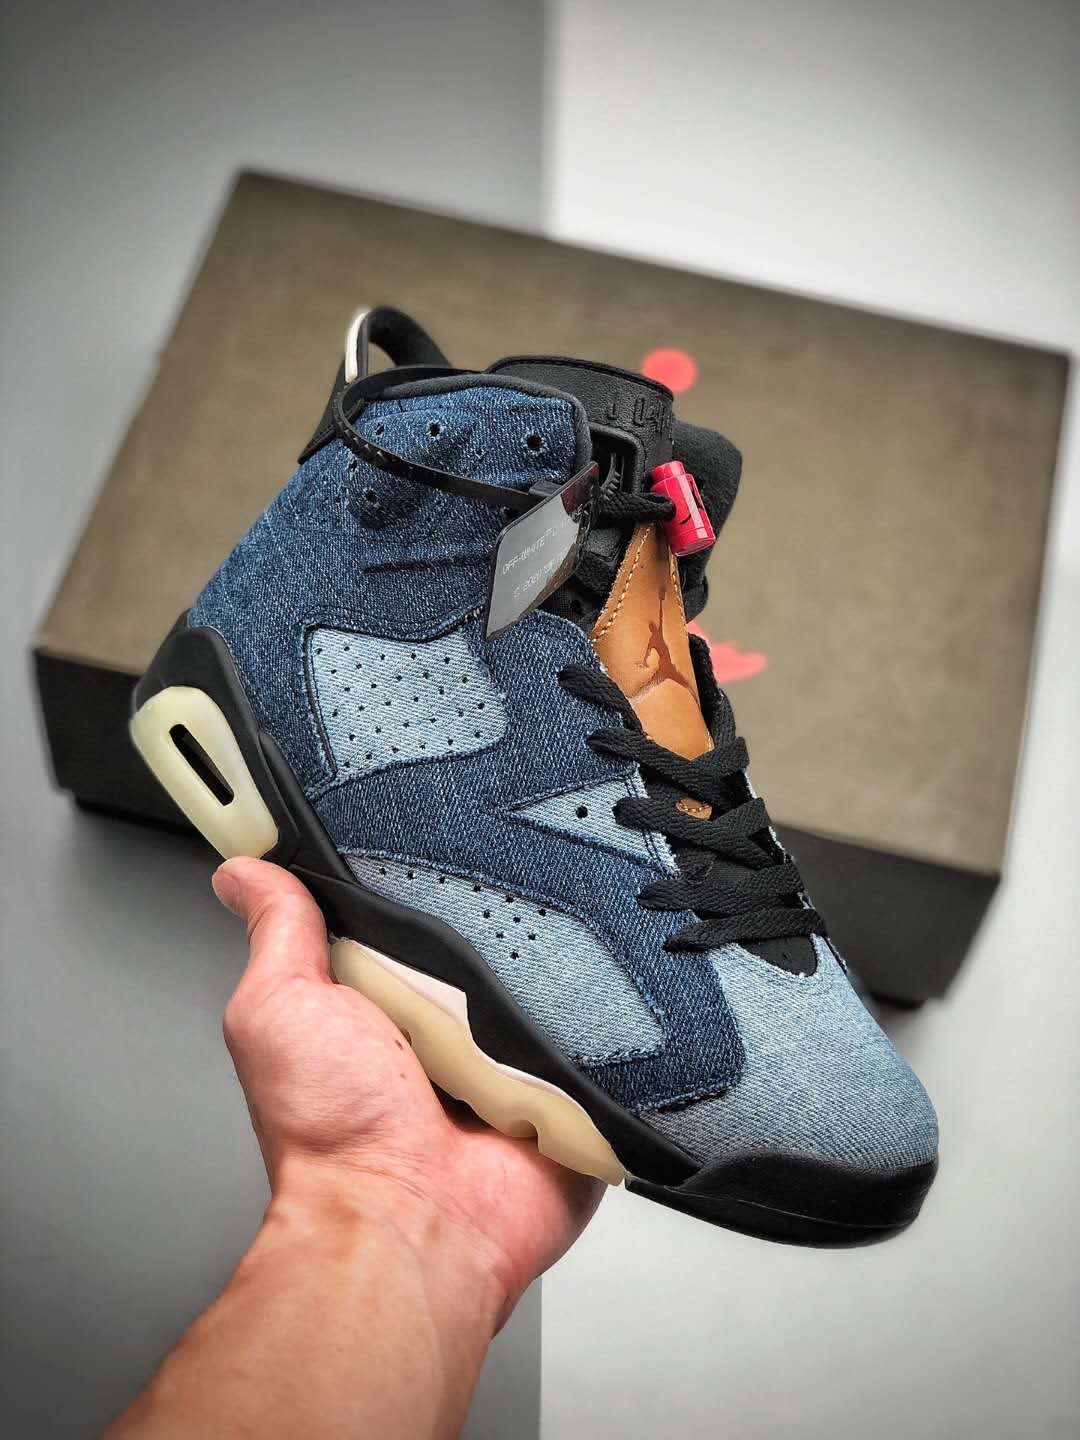 Air Jordan 6 Retro 'Washed Denim' CT5350-401 - Authentic Style & Comfort | Limited Availability